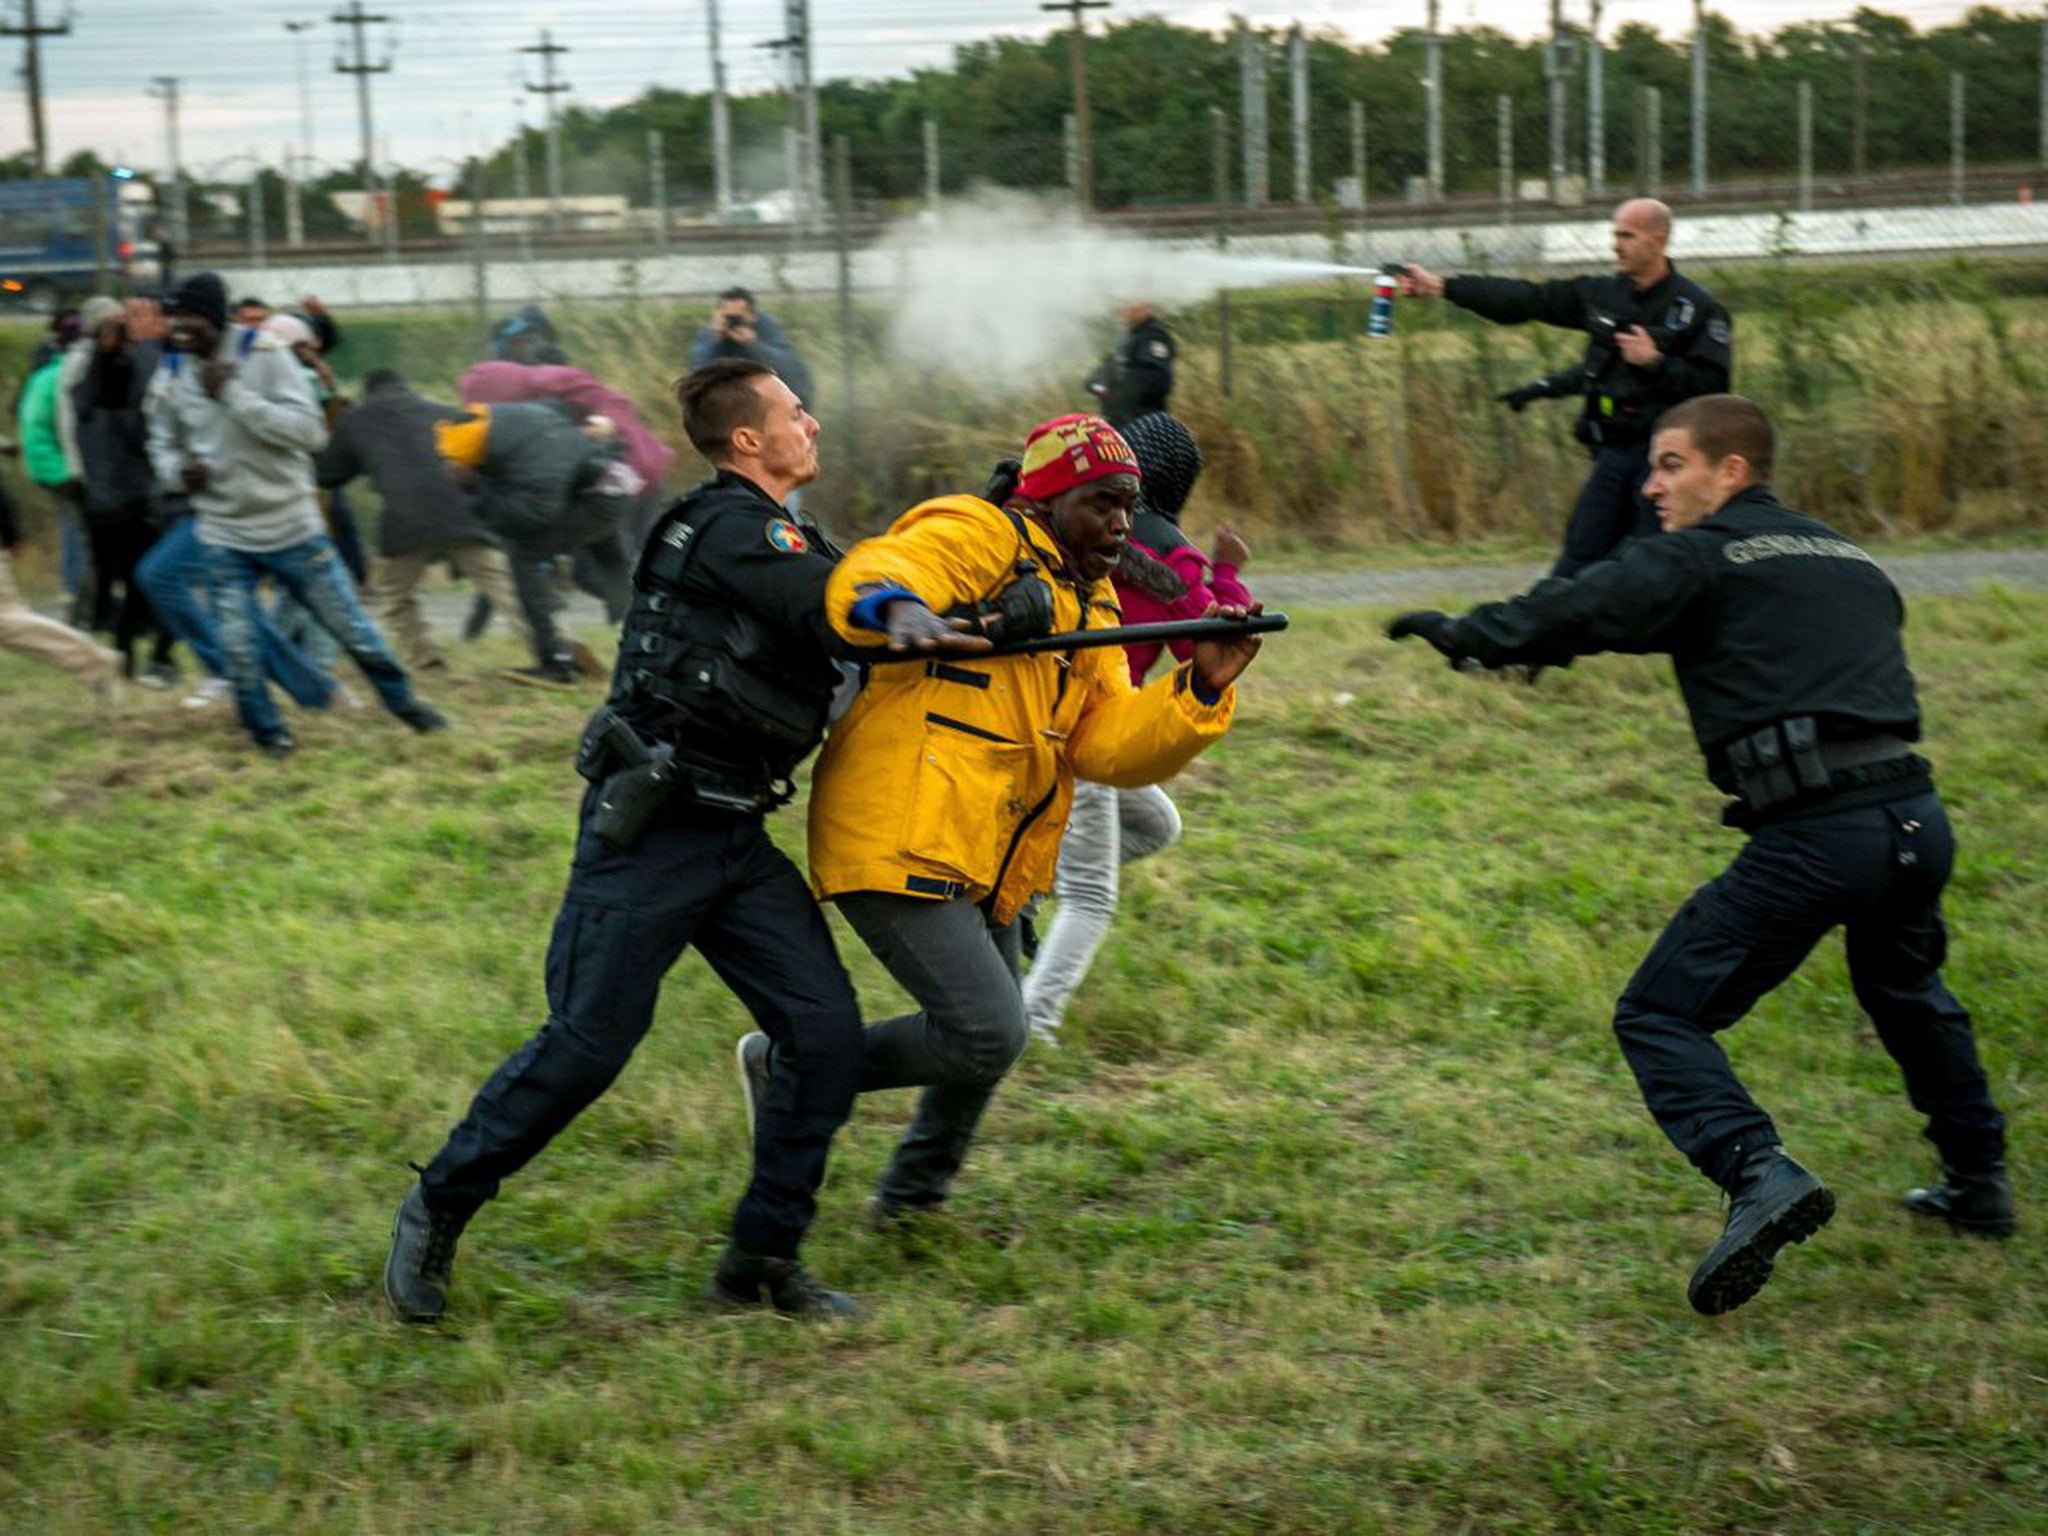 The refugee crisis in Calais was marked by running battles with police last summer